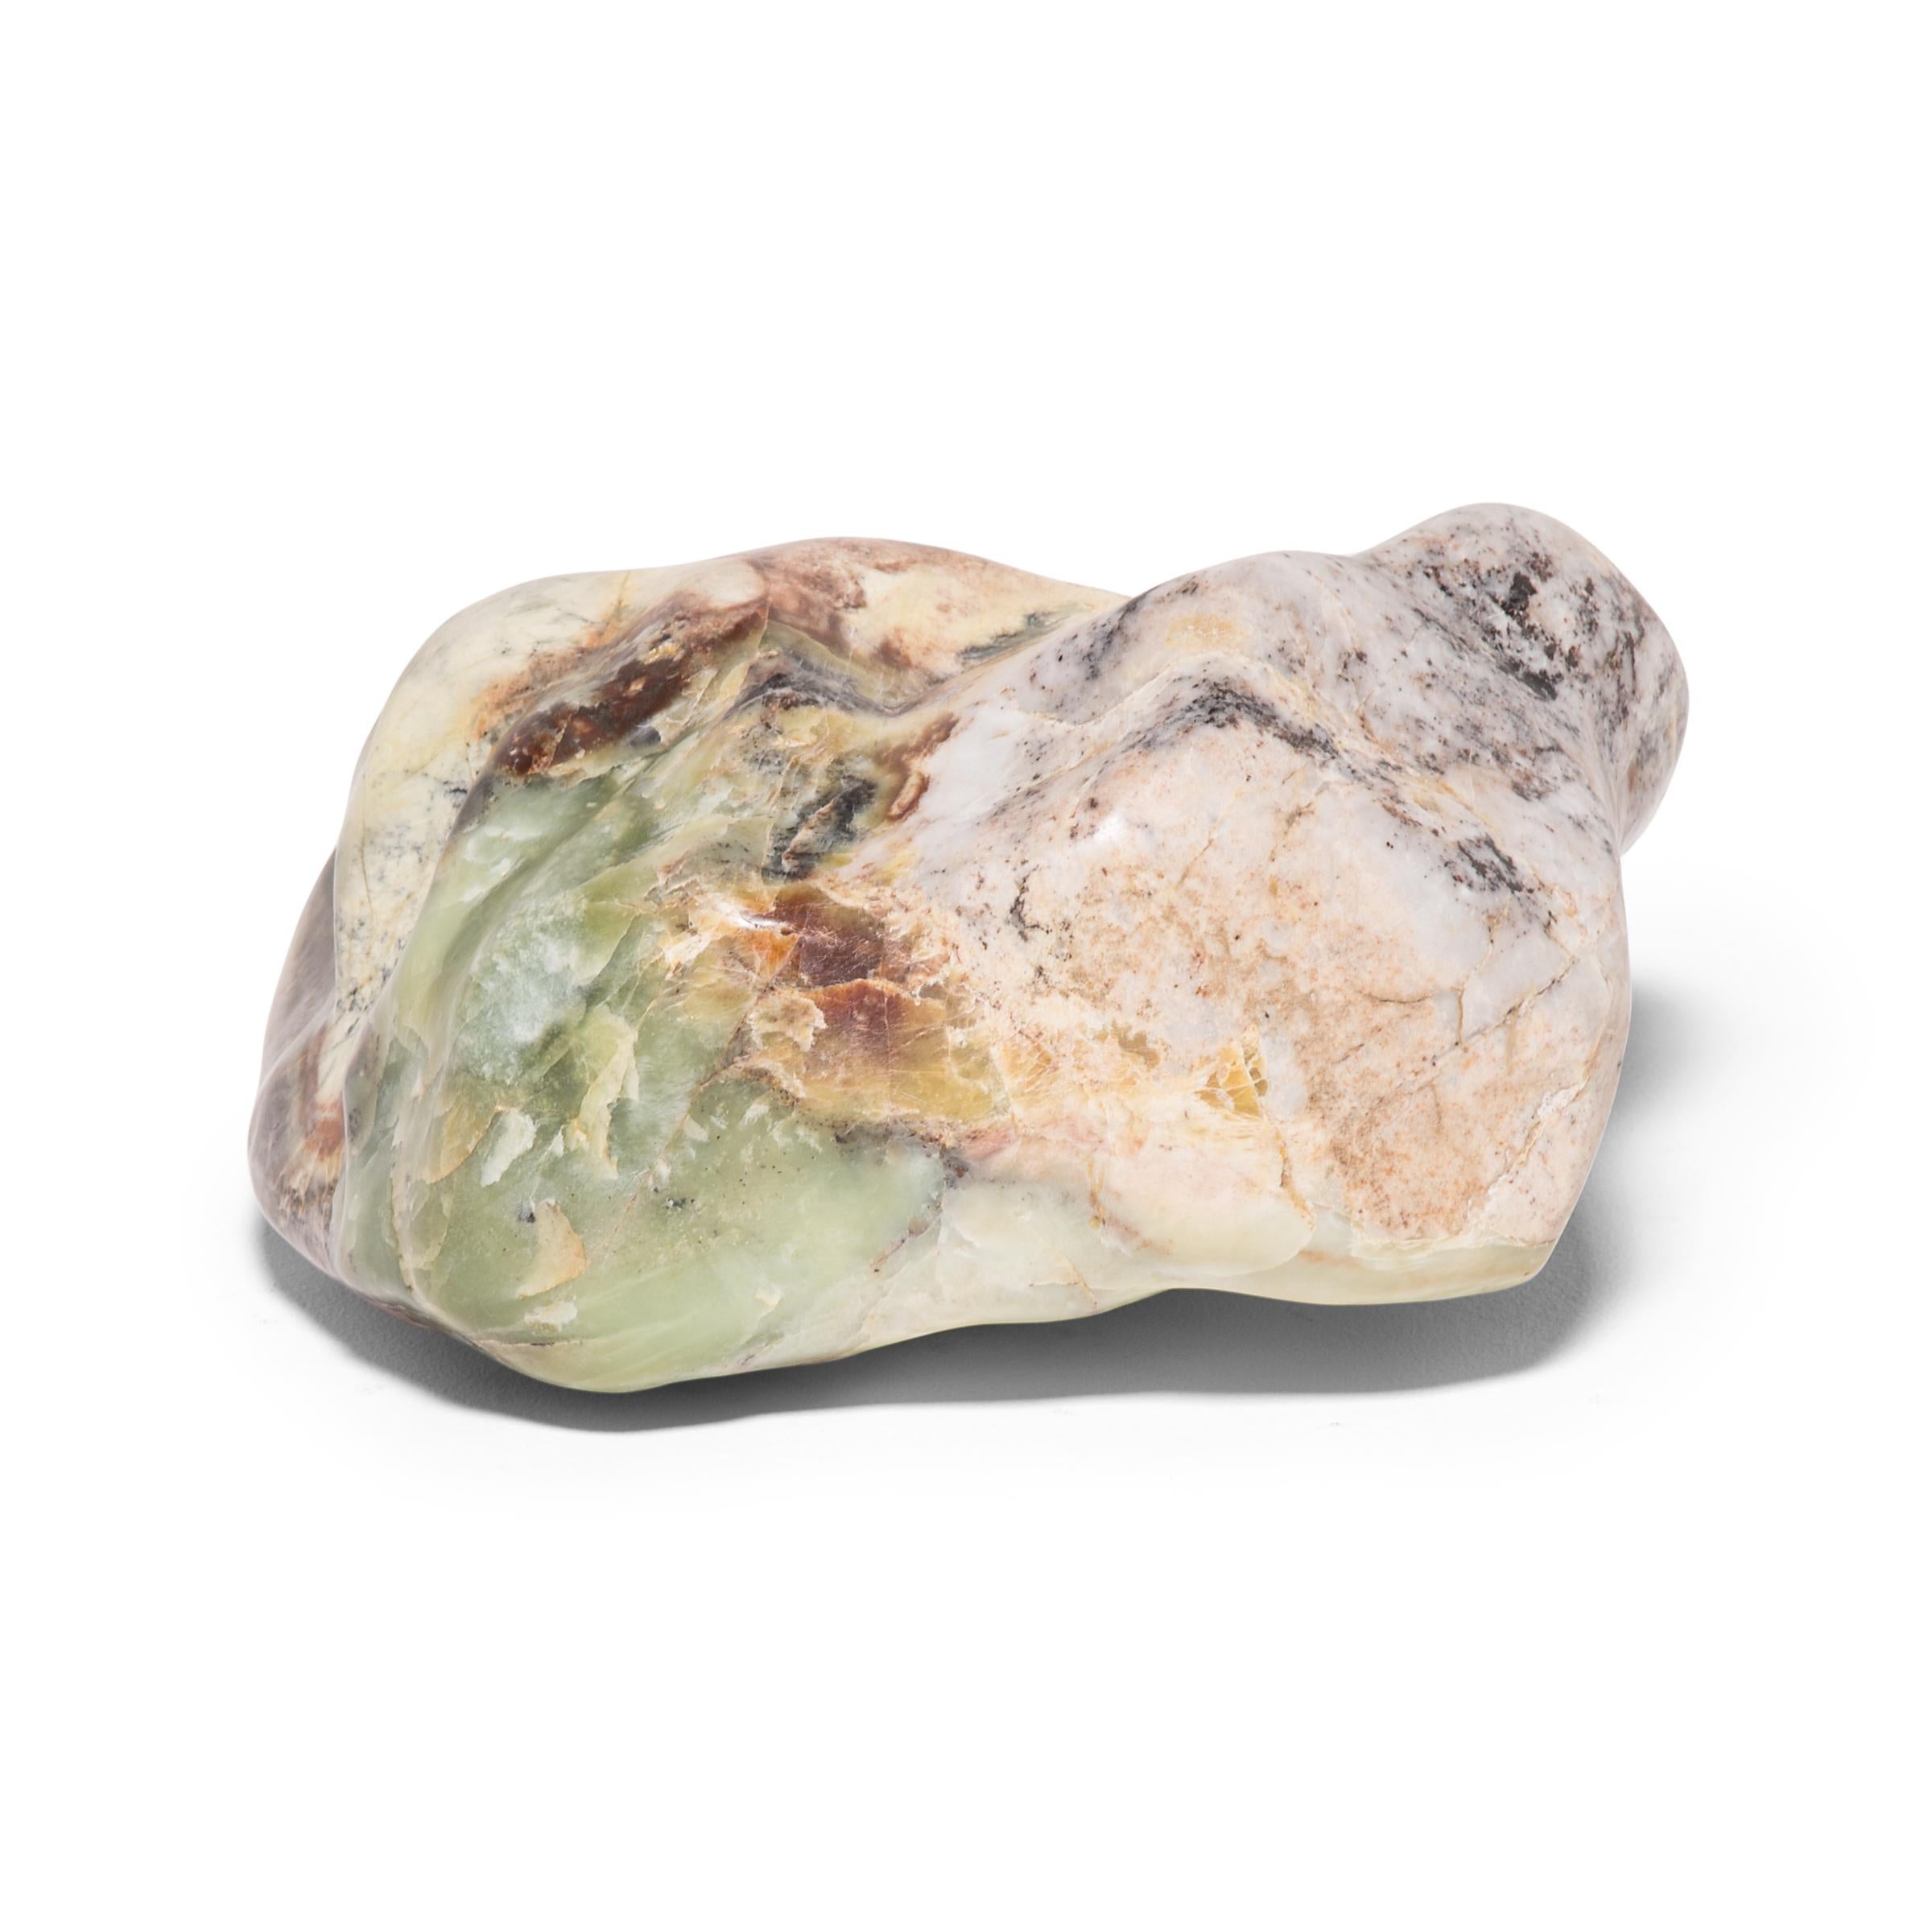 Following the softly sculpted form, green marbled coloring, and natural veins of this one-of-a-kind stone can be deeply meditative. Scholars in ancient China decorated their studios or gardens with stones like this beautiful Balin stone from Dongbei